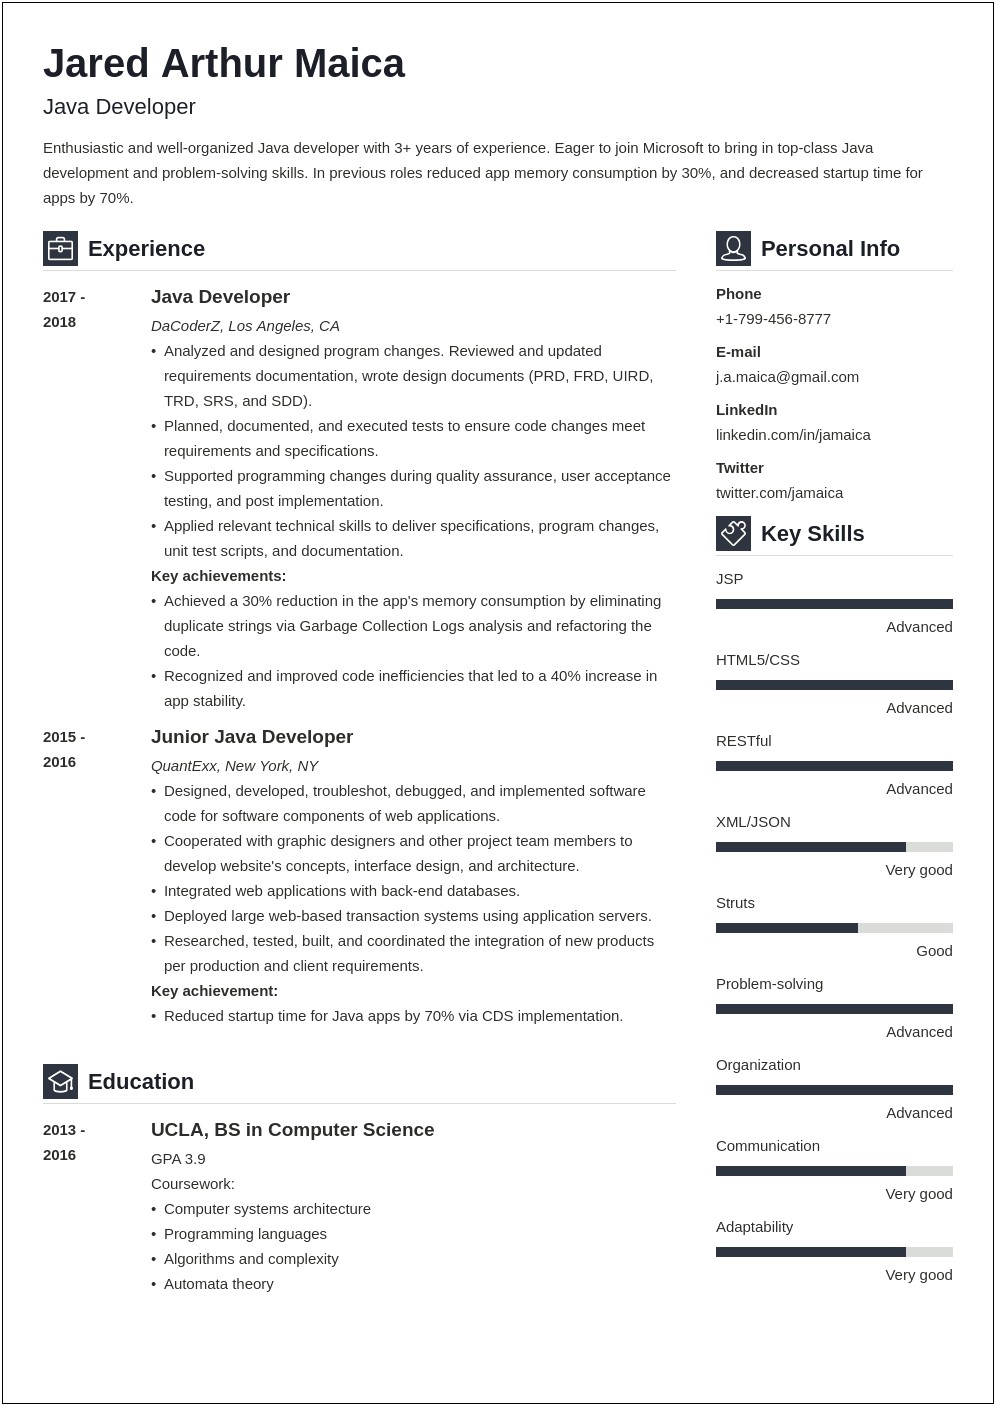 2 Years Experience Resume Format In Java